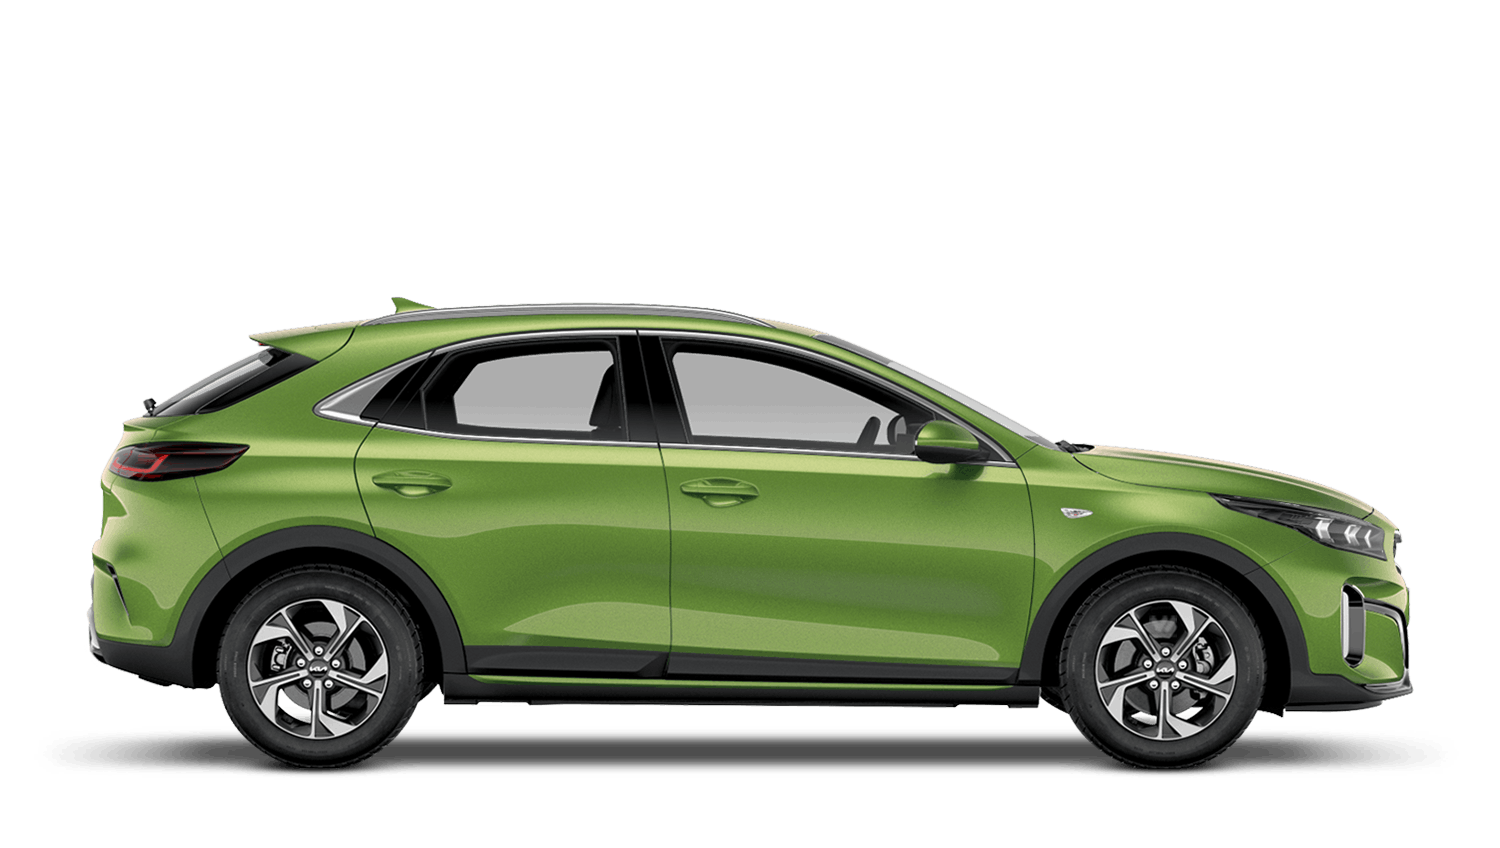 Kia XCeed. A Sporty Compact Crossover with £2,500 Deposit Contribution | 7.9% APR